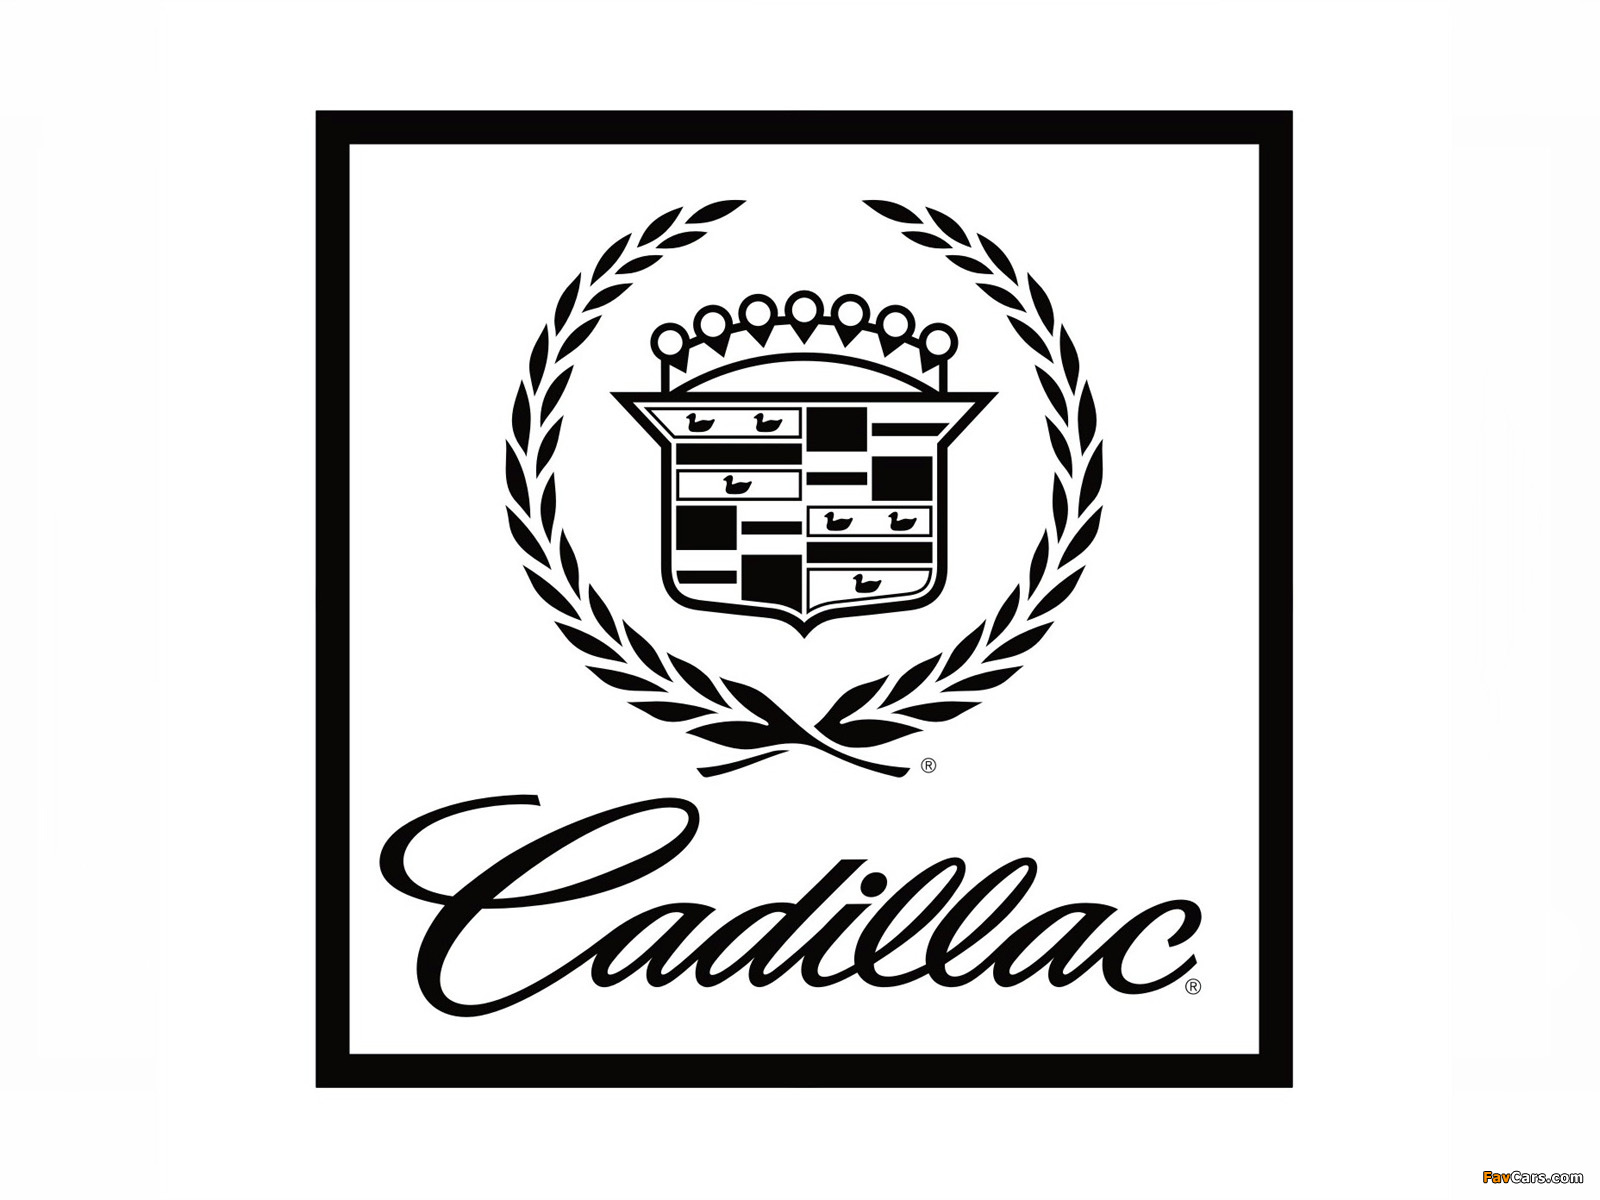 Cadillac images (1600 x 1200)